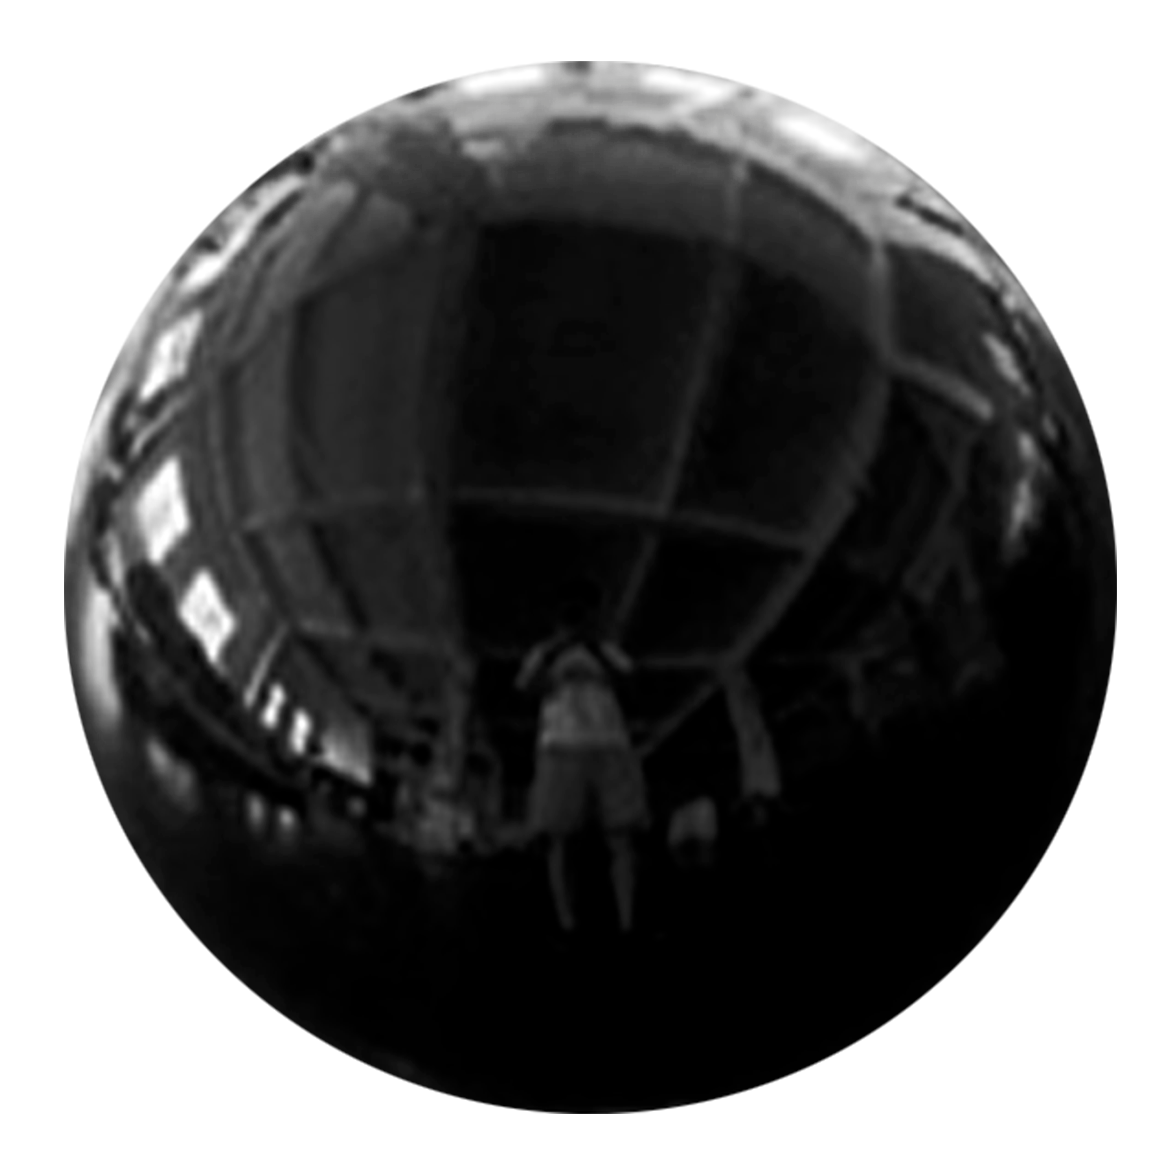 Buy Inflatable 50 centimeters Shiny Round Black Sphere